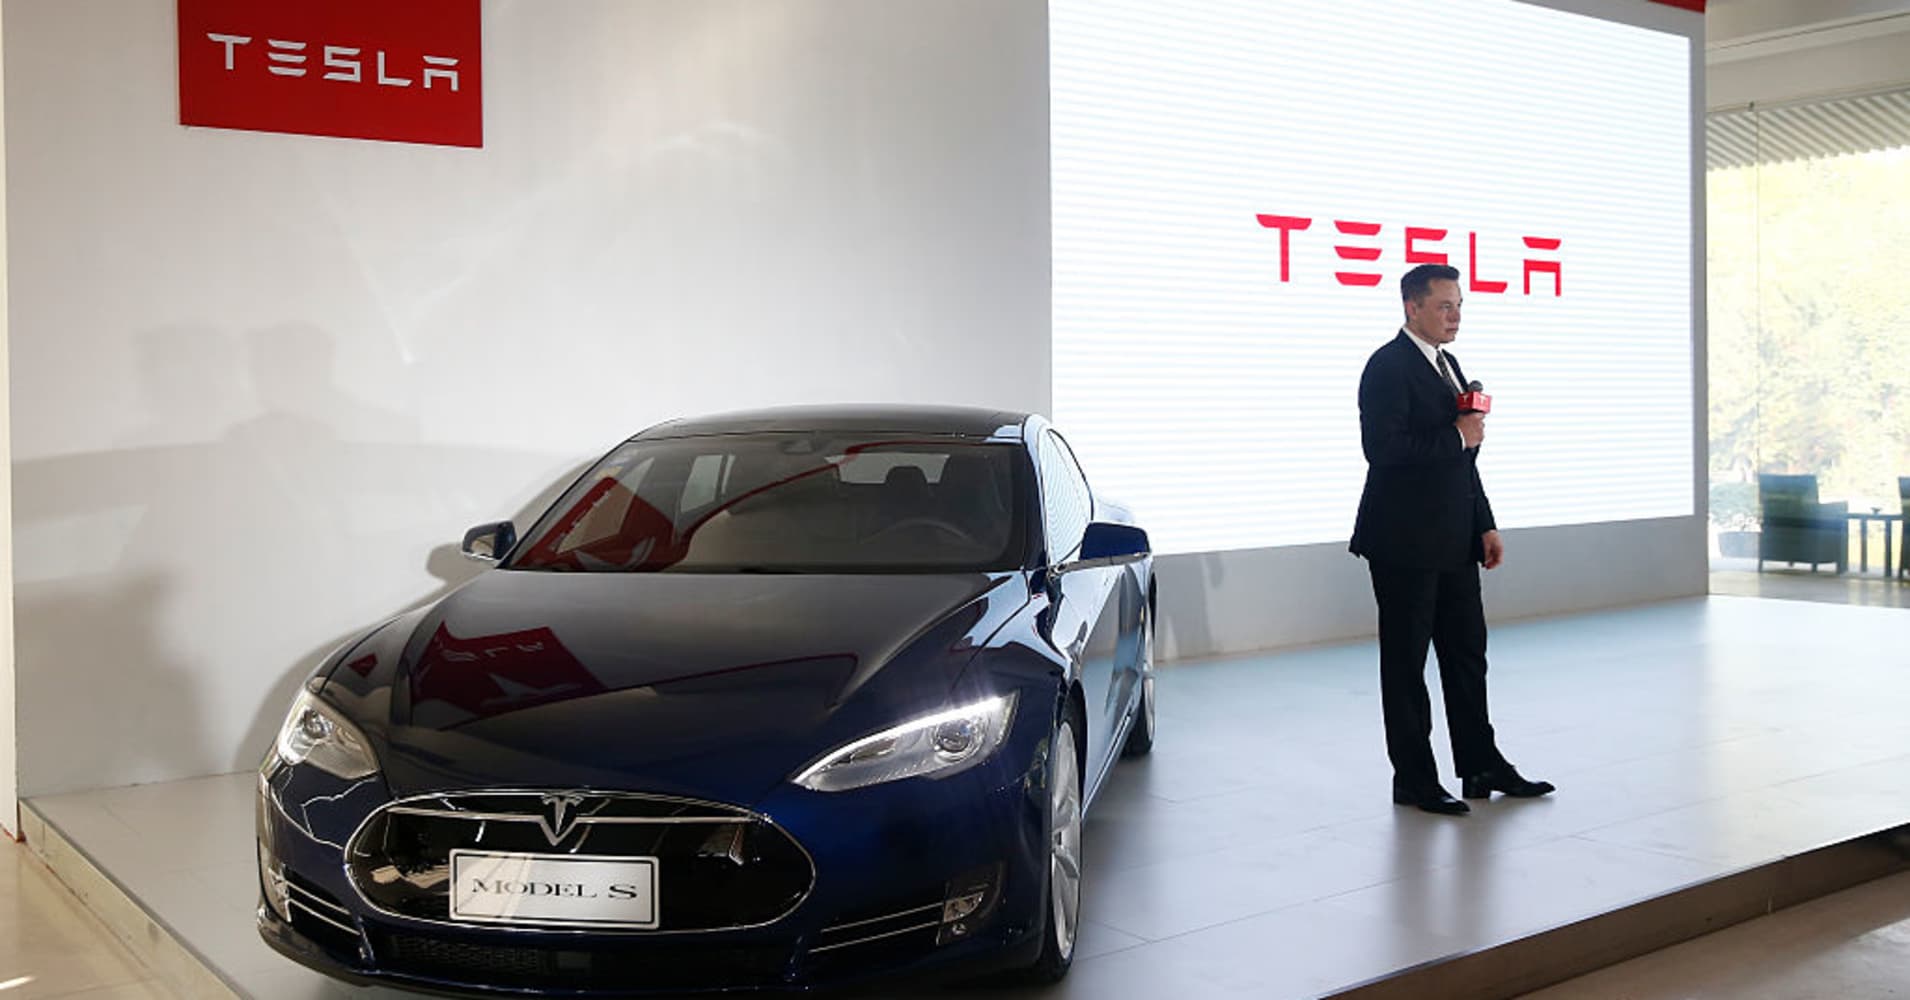 Elon Musk: Tesla cars will be self-driving and know your schedule